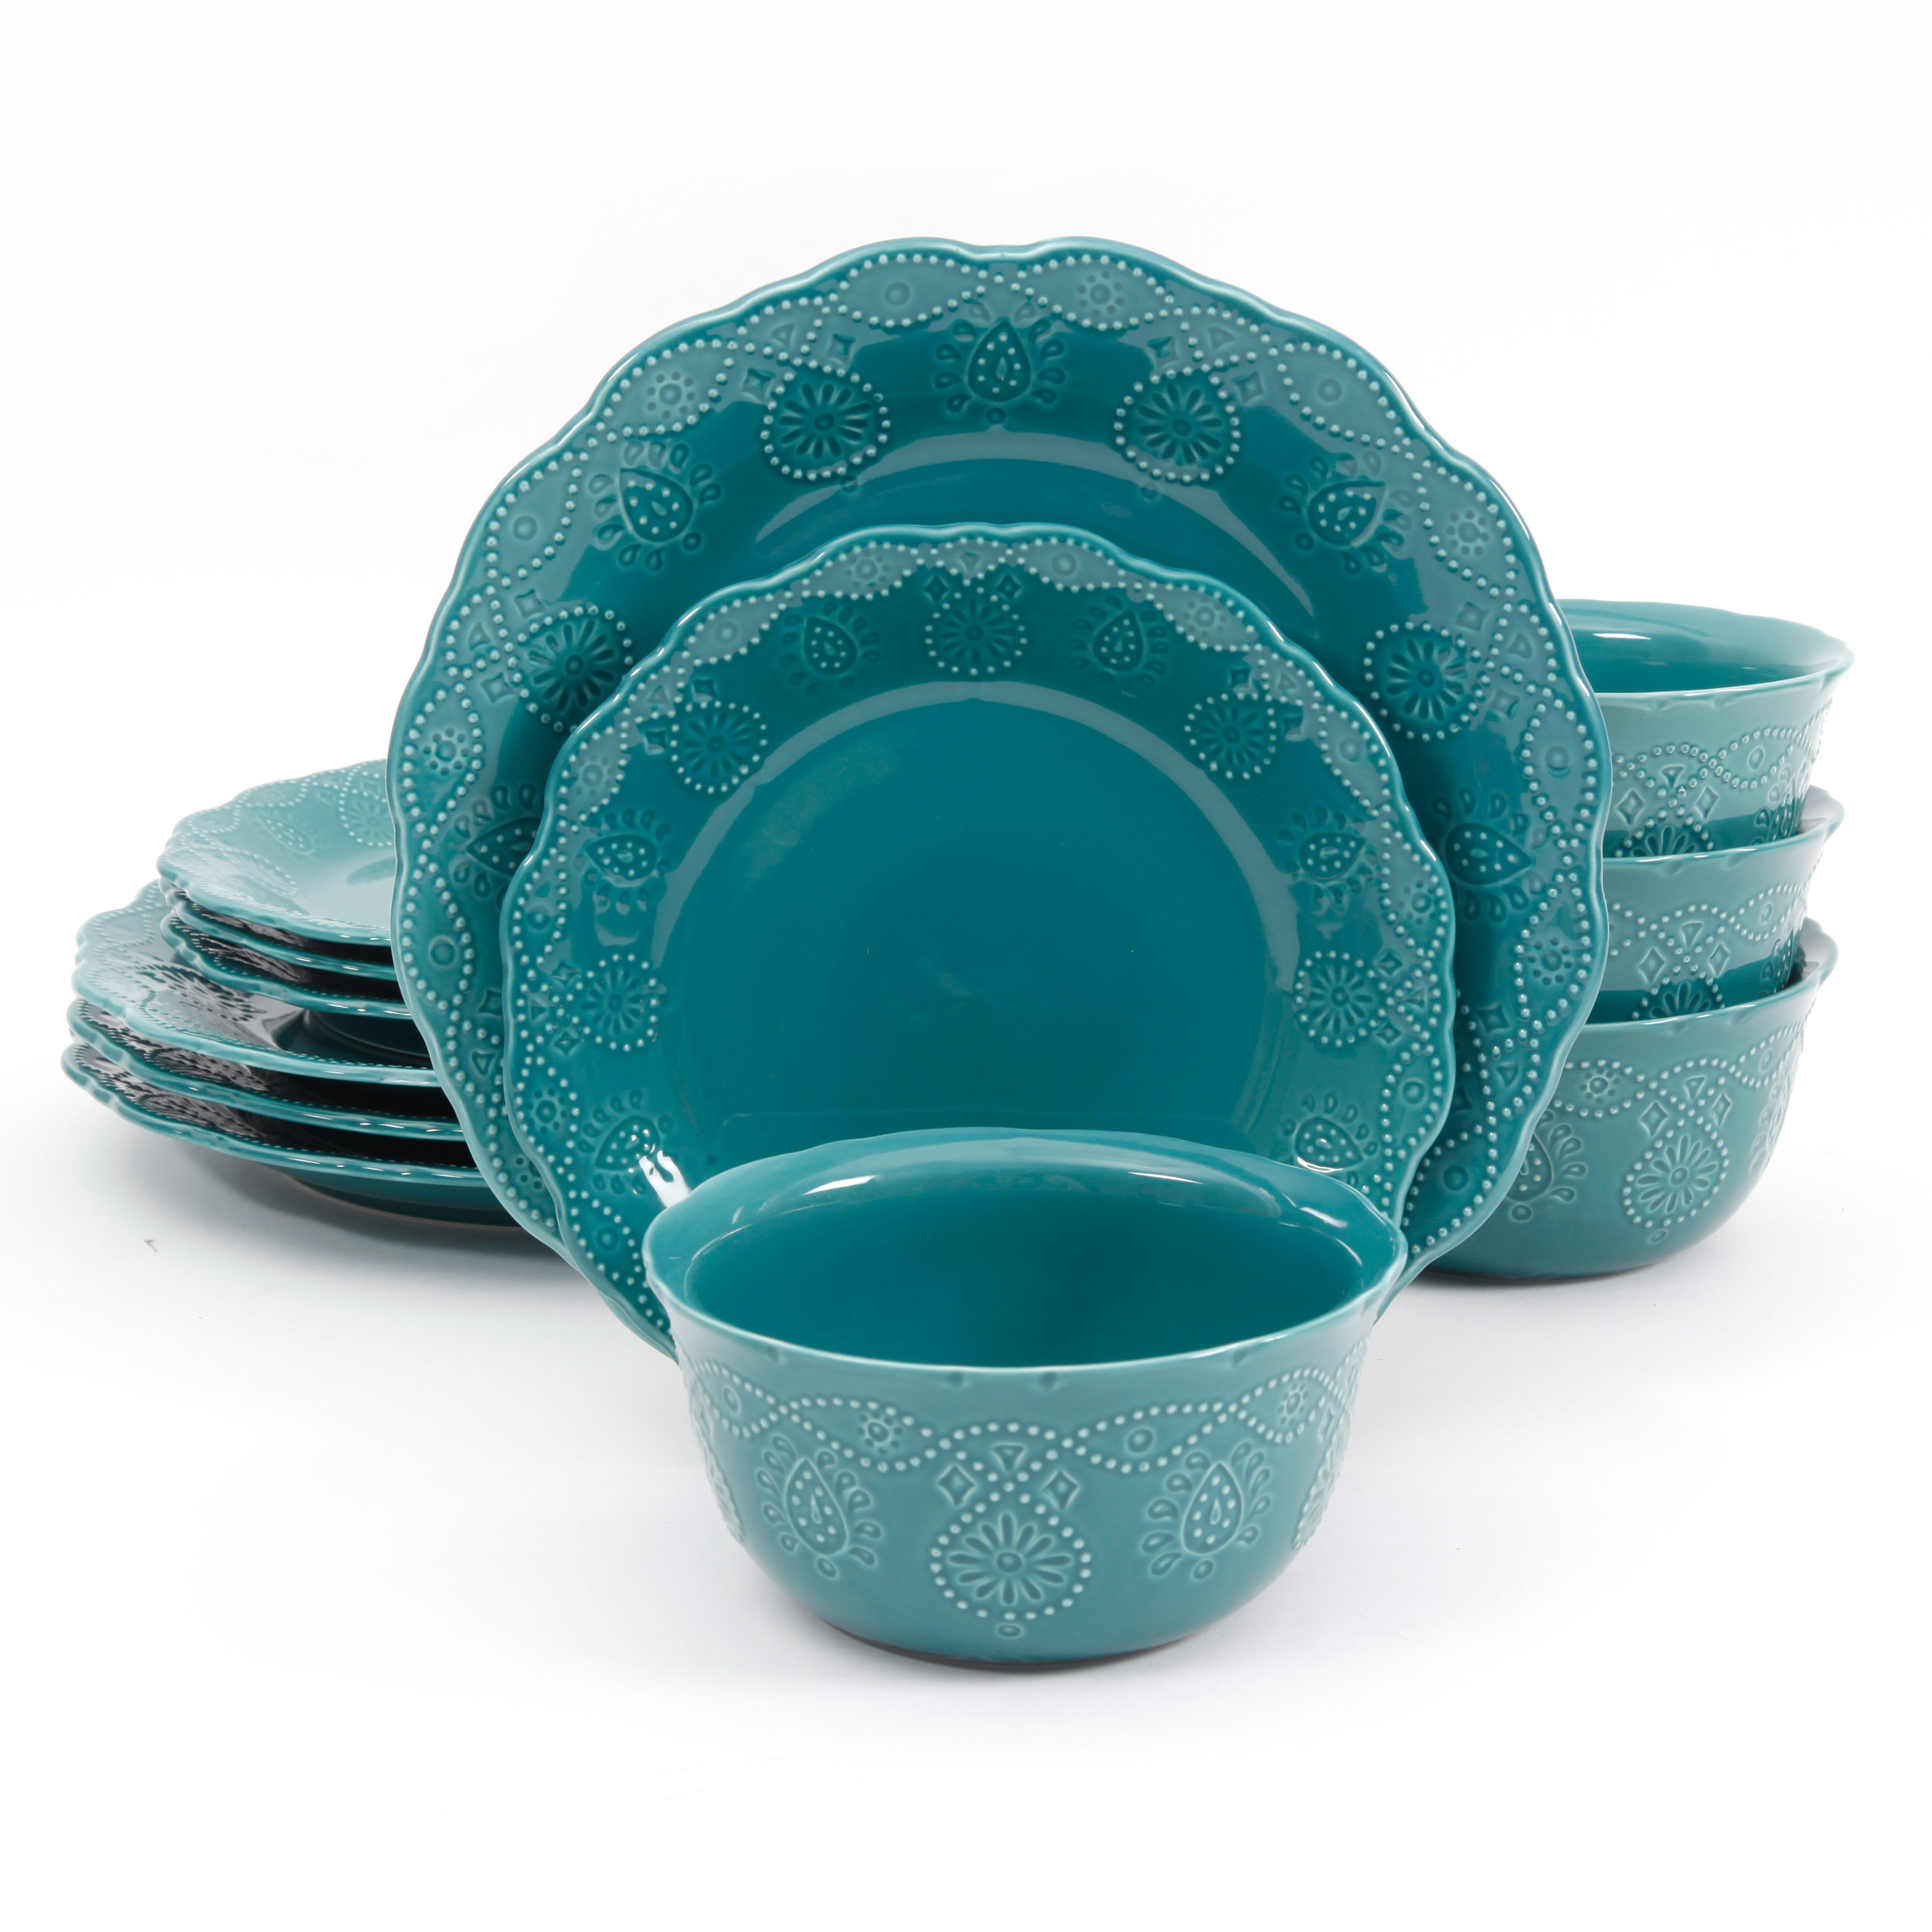 The Pioneer Woman Cowgirl Lace 12-Piece Dinnerware Set, Teal - image 1 of 7